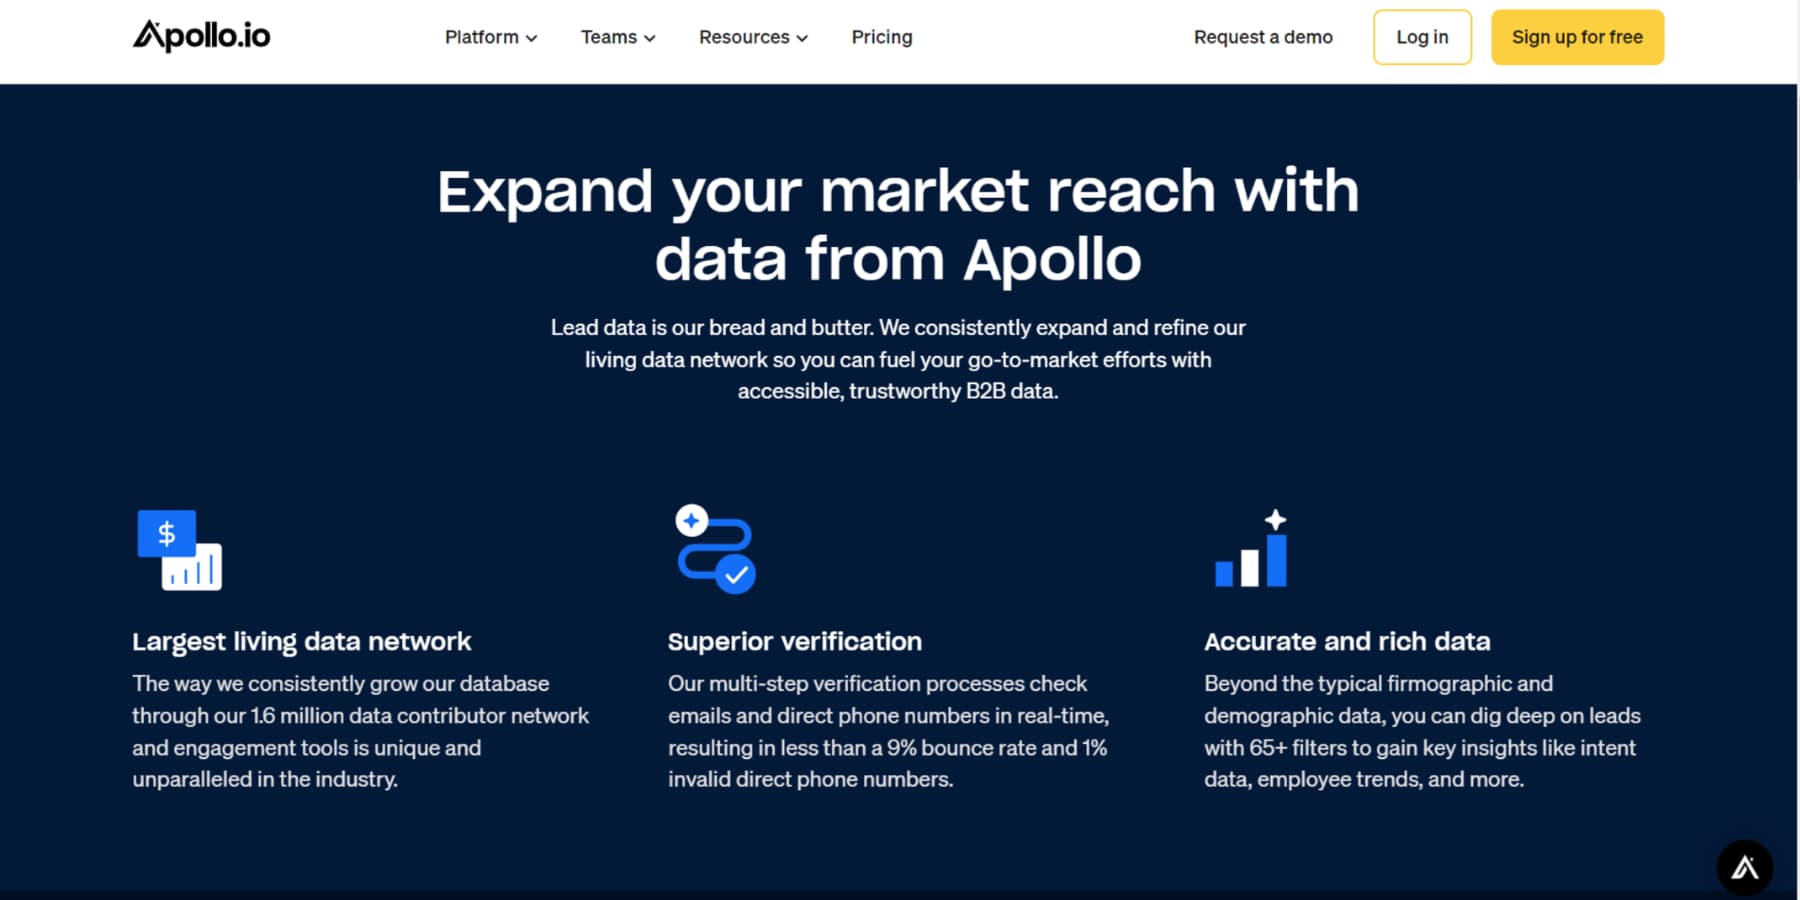 A screenshot of explanation of Apollo's Accuracy feature from one of the landing pages